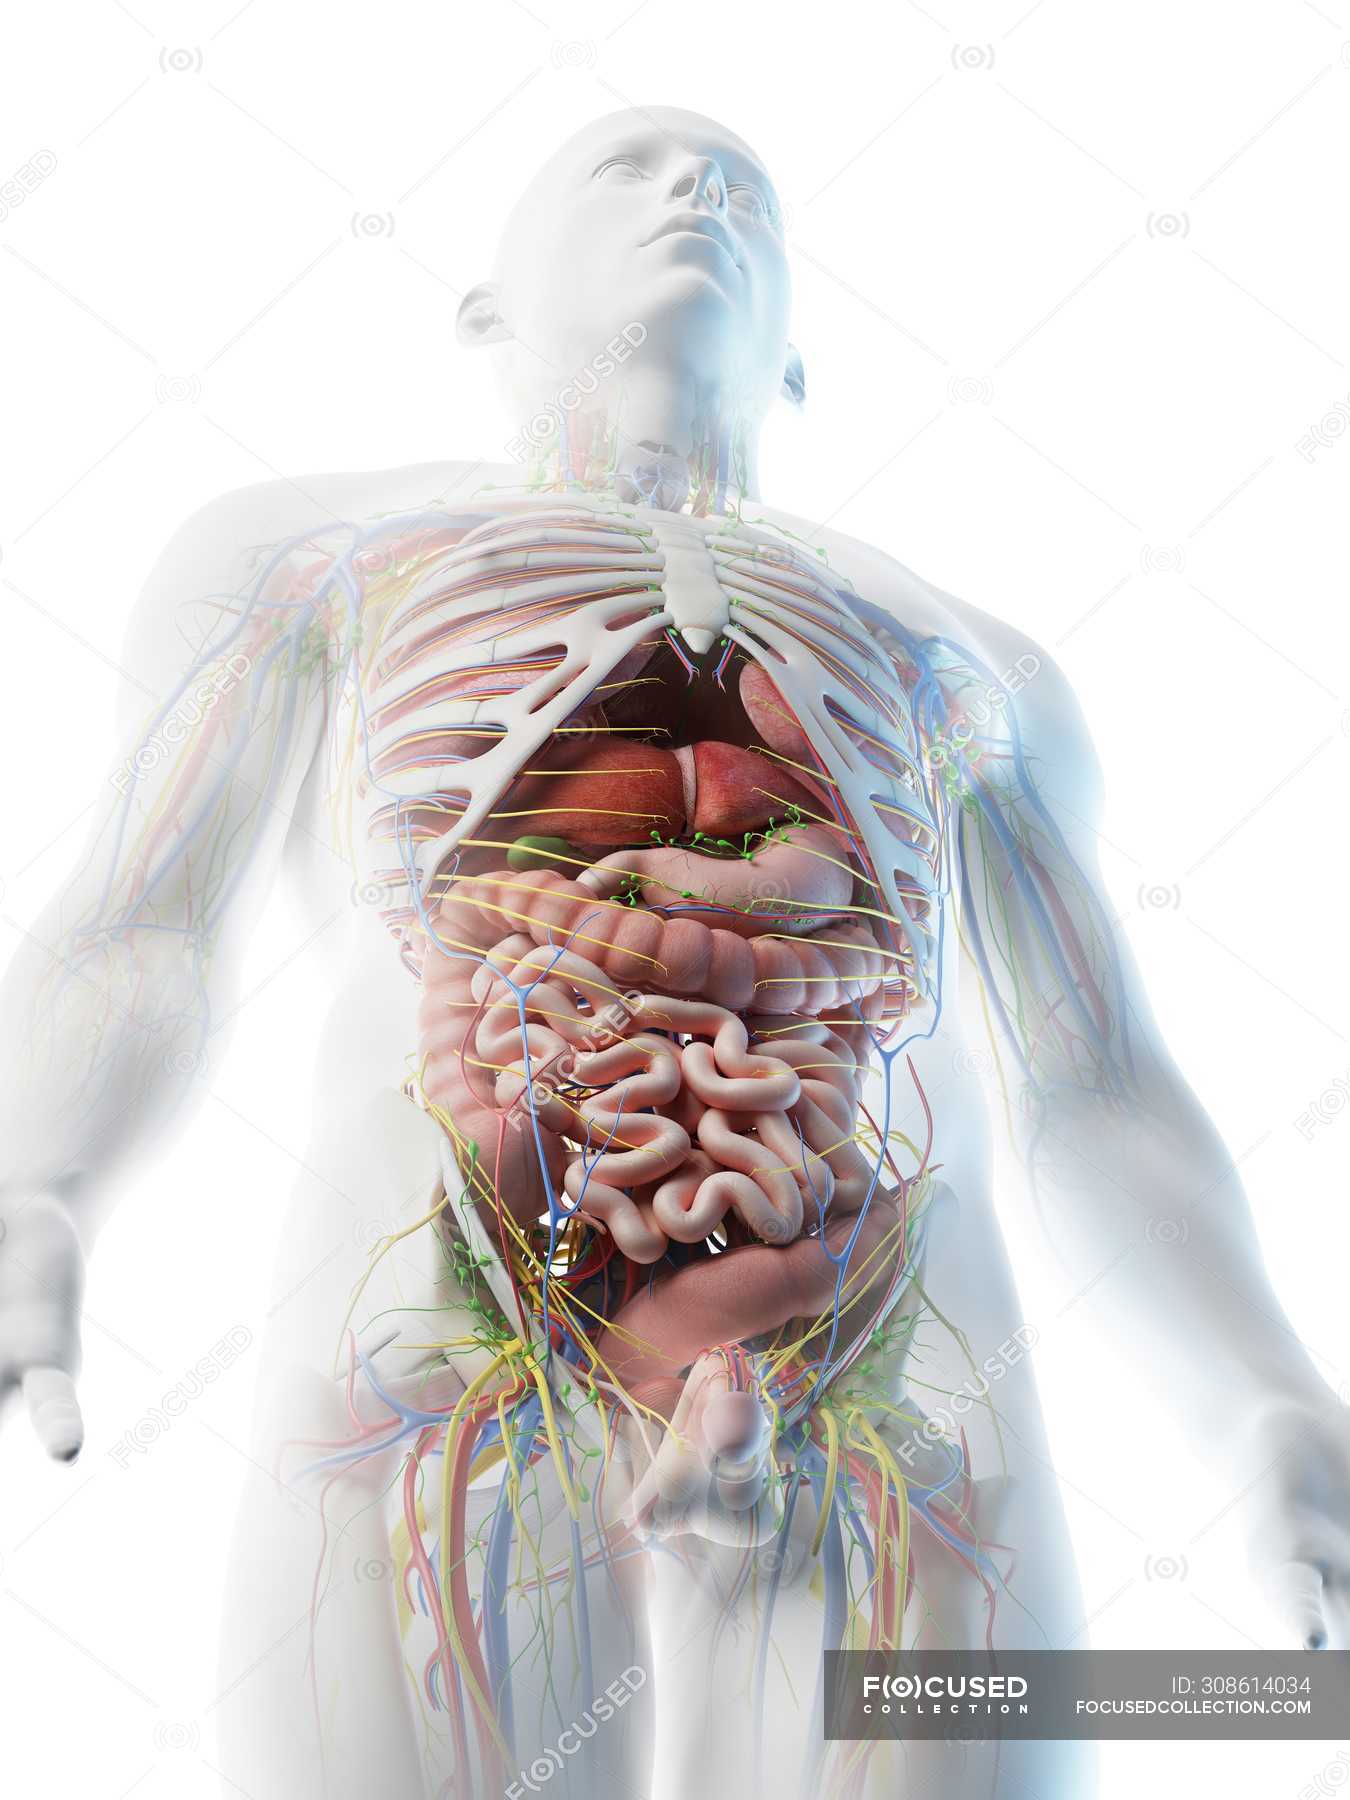 Male Upper Body Anatomy And Internal Organs In Low Angle View Computer Illustration Science Lymph Nodes Stock Photo 308614034